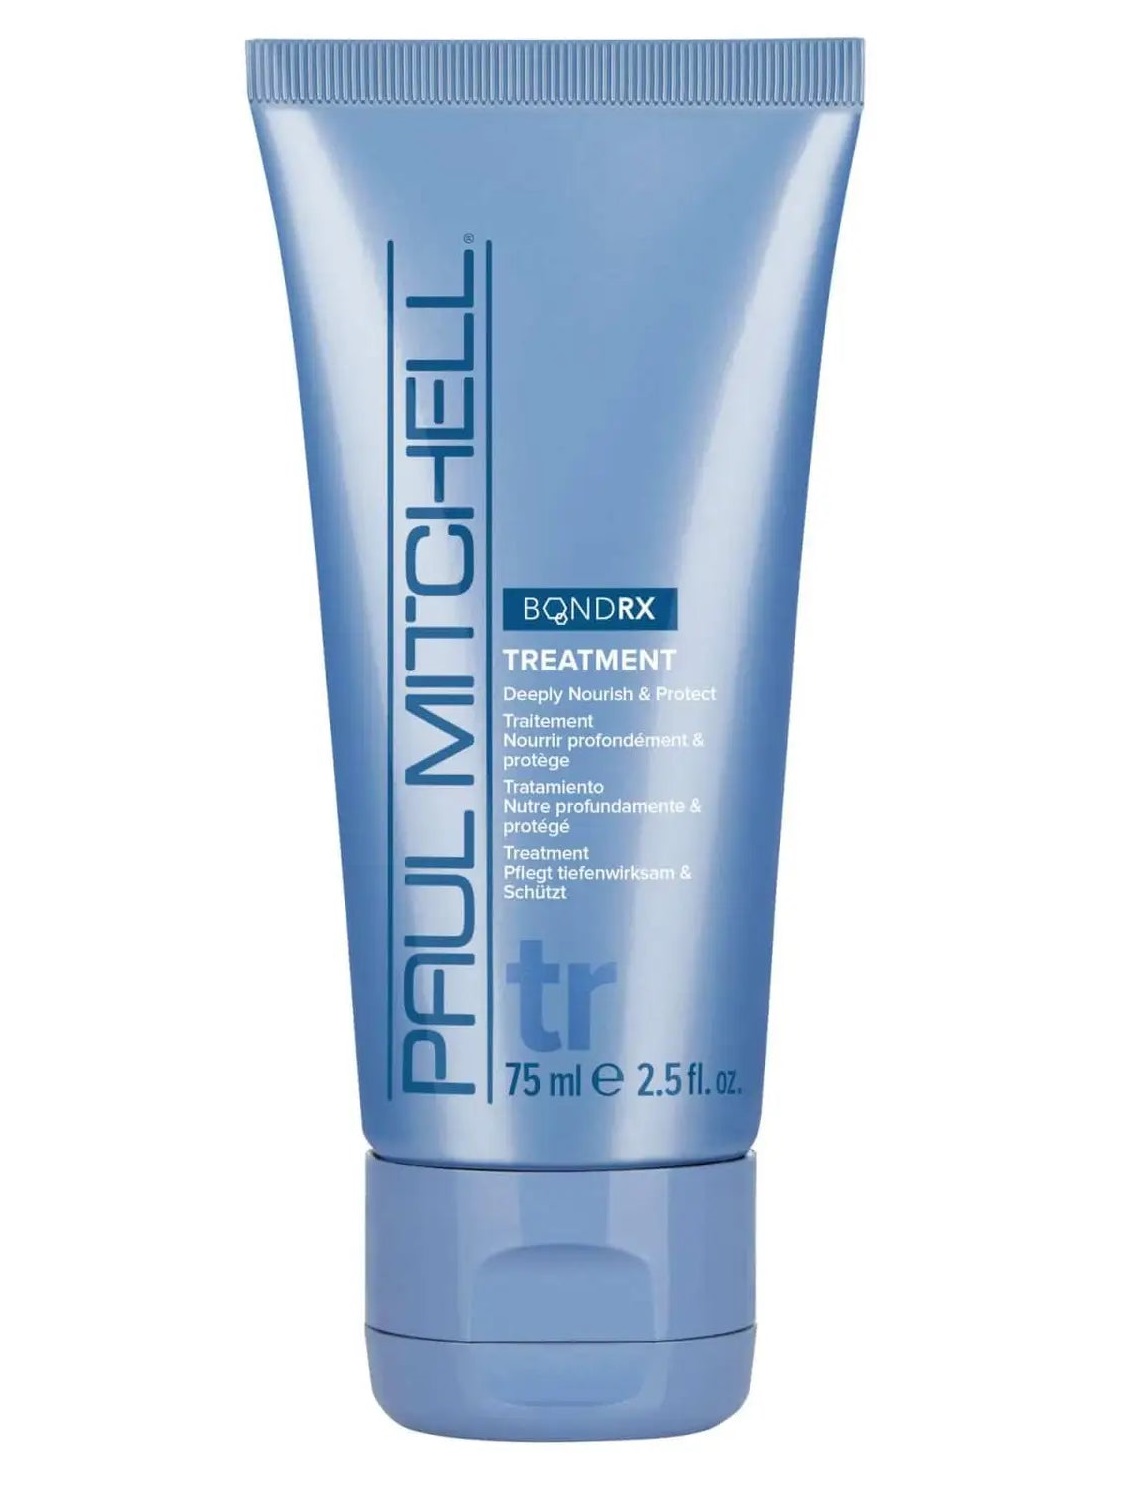 Paul Mitchell Bond Rx Deep Nourishing & Protect Treatment for Chemically Treated Hair 75ml